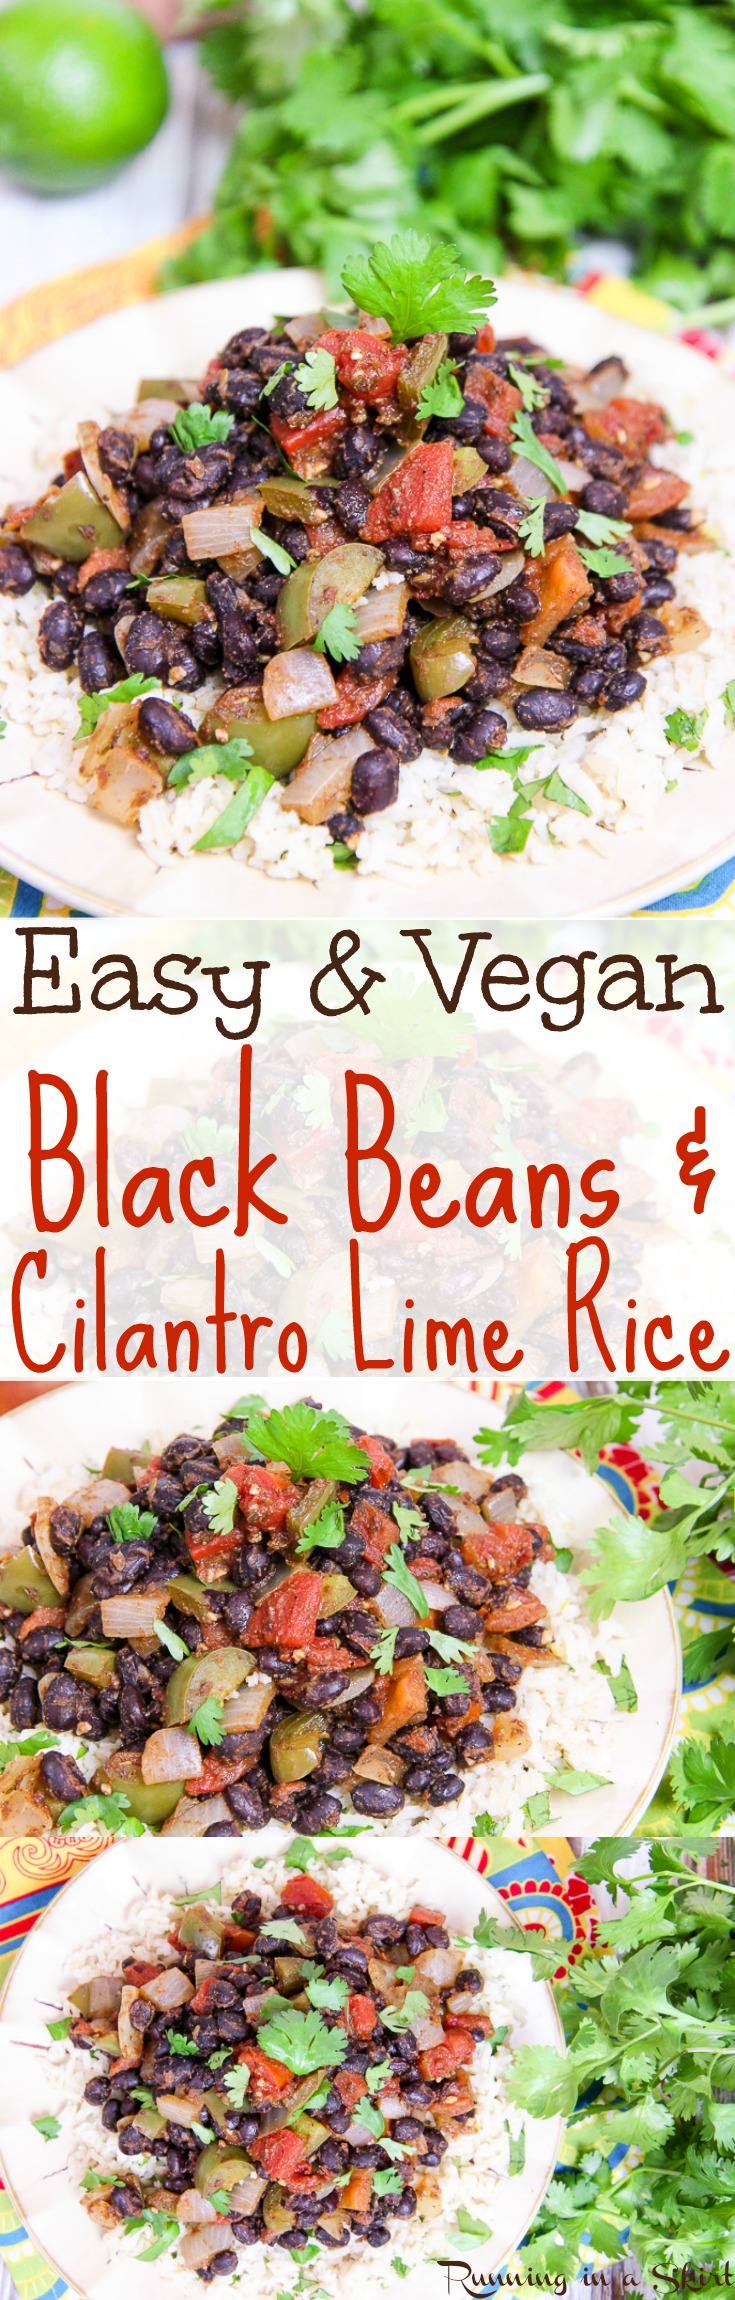 15 Minute Easy & Vegan Black Beans & Rice recipe. A healthy, simple, clean and fast vegetarian meal, dinner or lunch. Also great as a side dish with Mexican or Tex Mex food! Uses canned beans and tomatoes as a shortcut. Perfect for Meatless Monday! / Running in a Skirt via @juliewunder